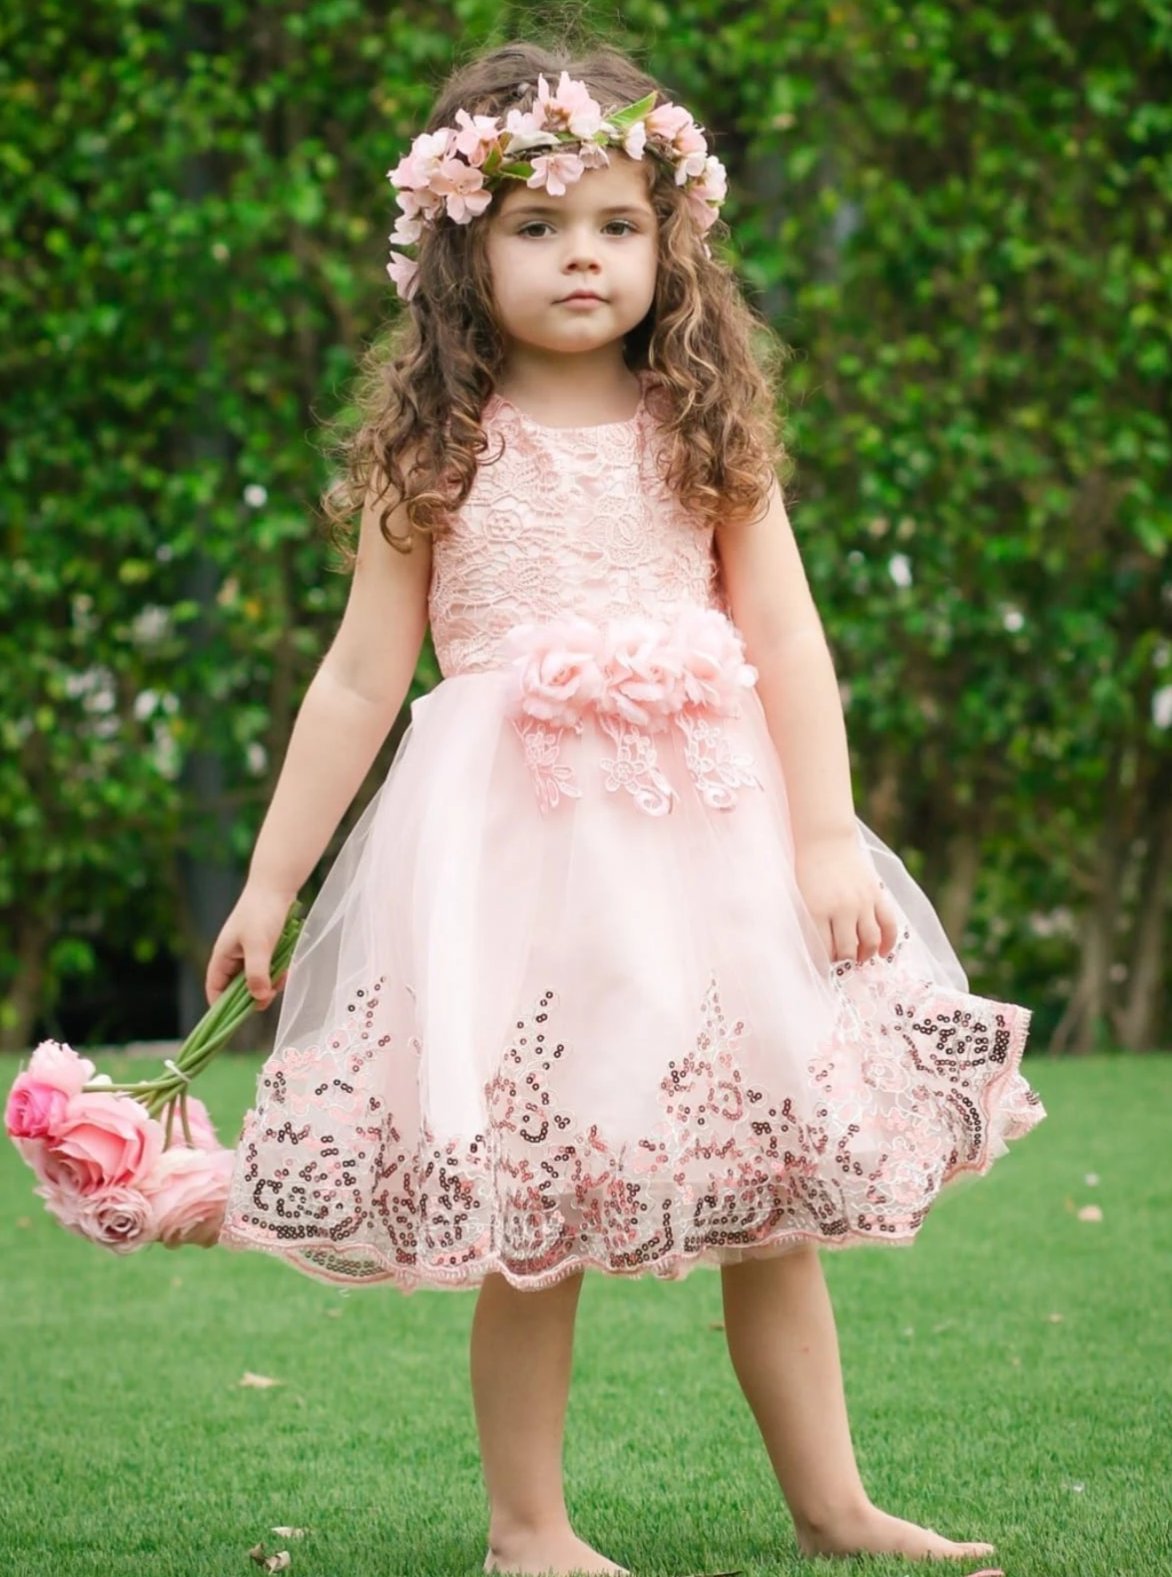 Party Dresses for Girls, Sequin & Lace Party Dresses